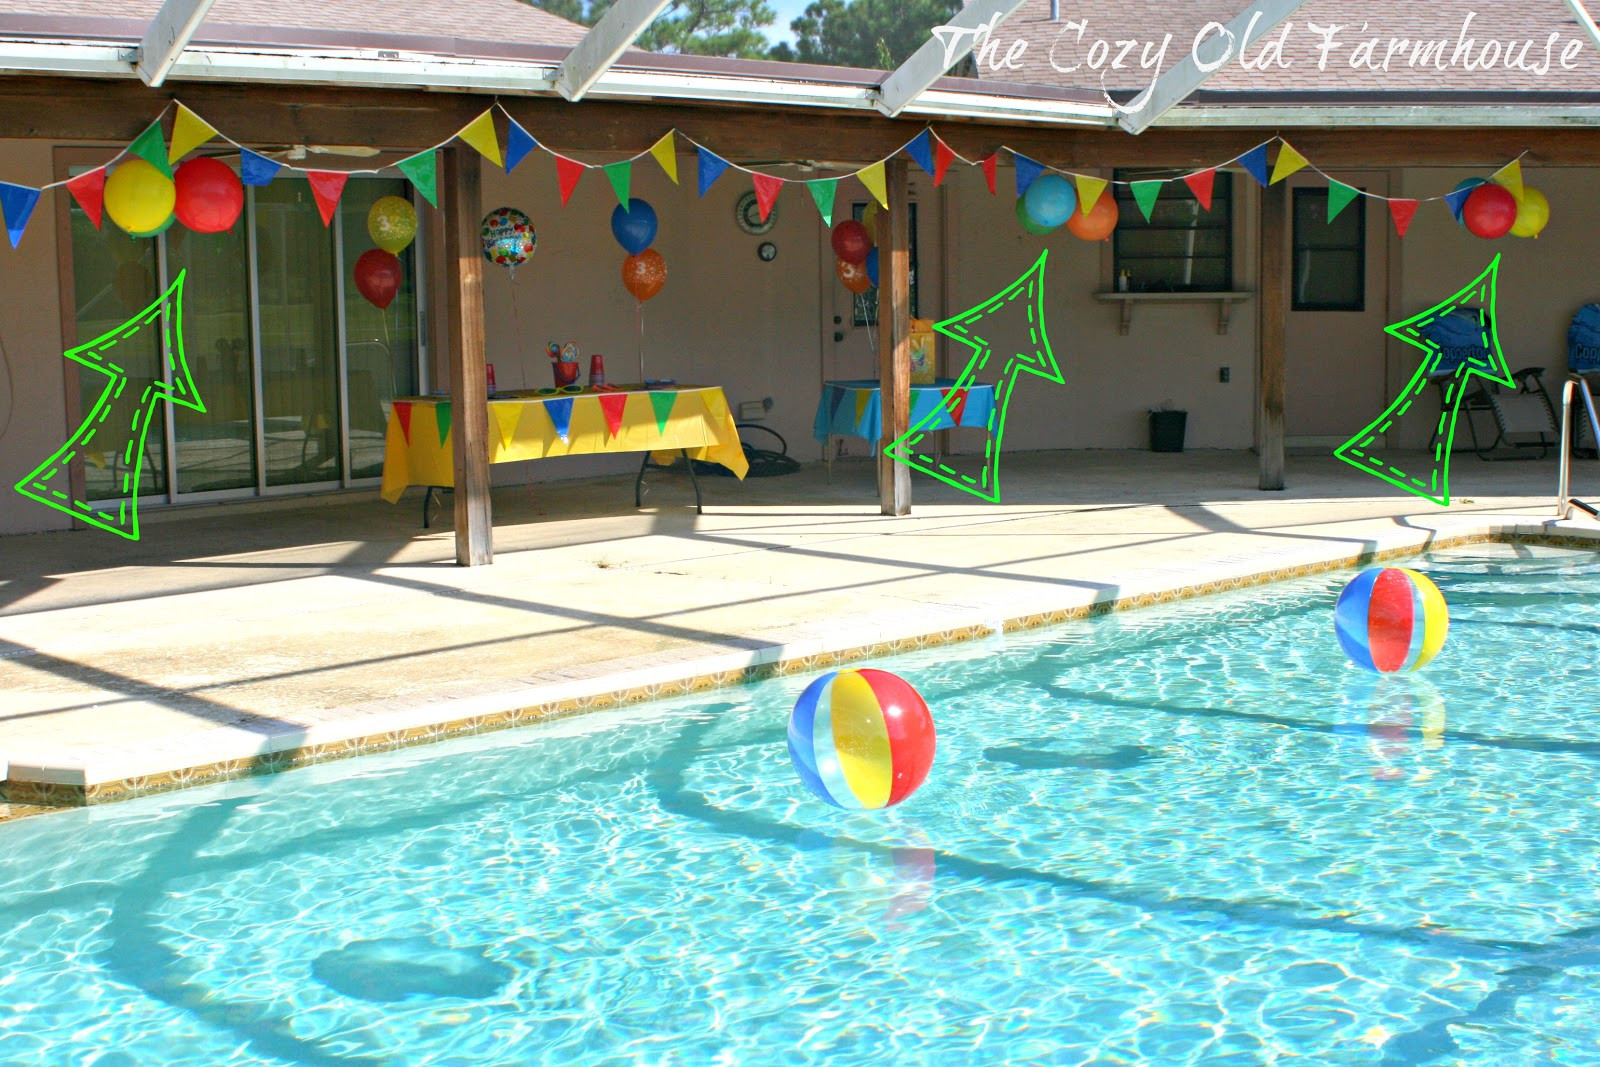 Pool Bday Party Ideas
 The Cozy Old "Farmhouse" Simple and Bud Friendly Pool